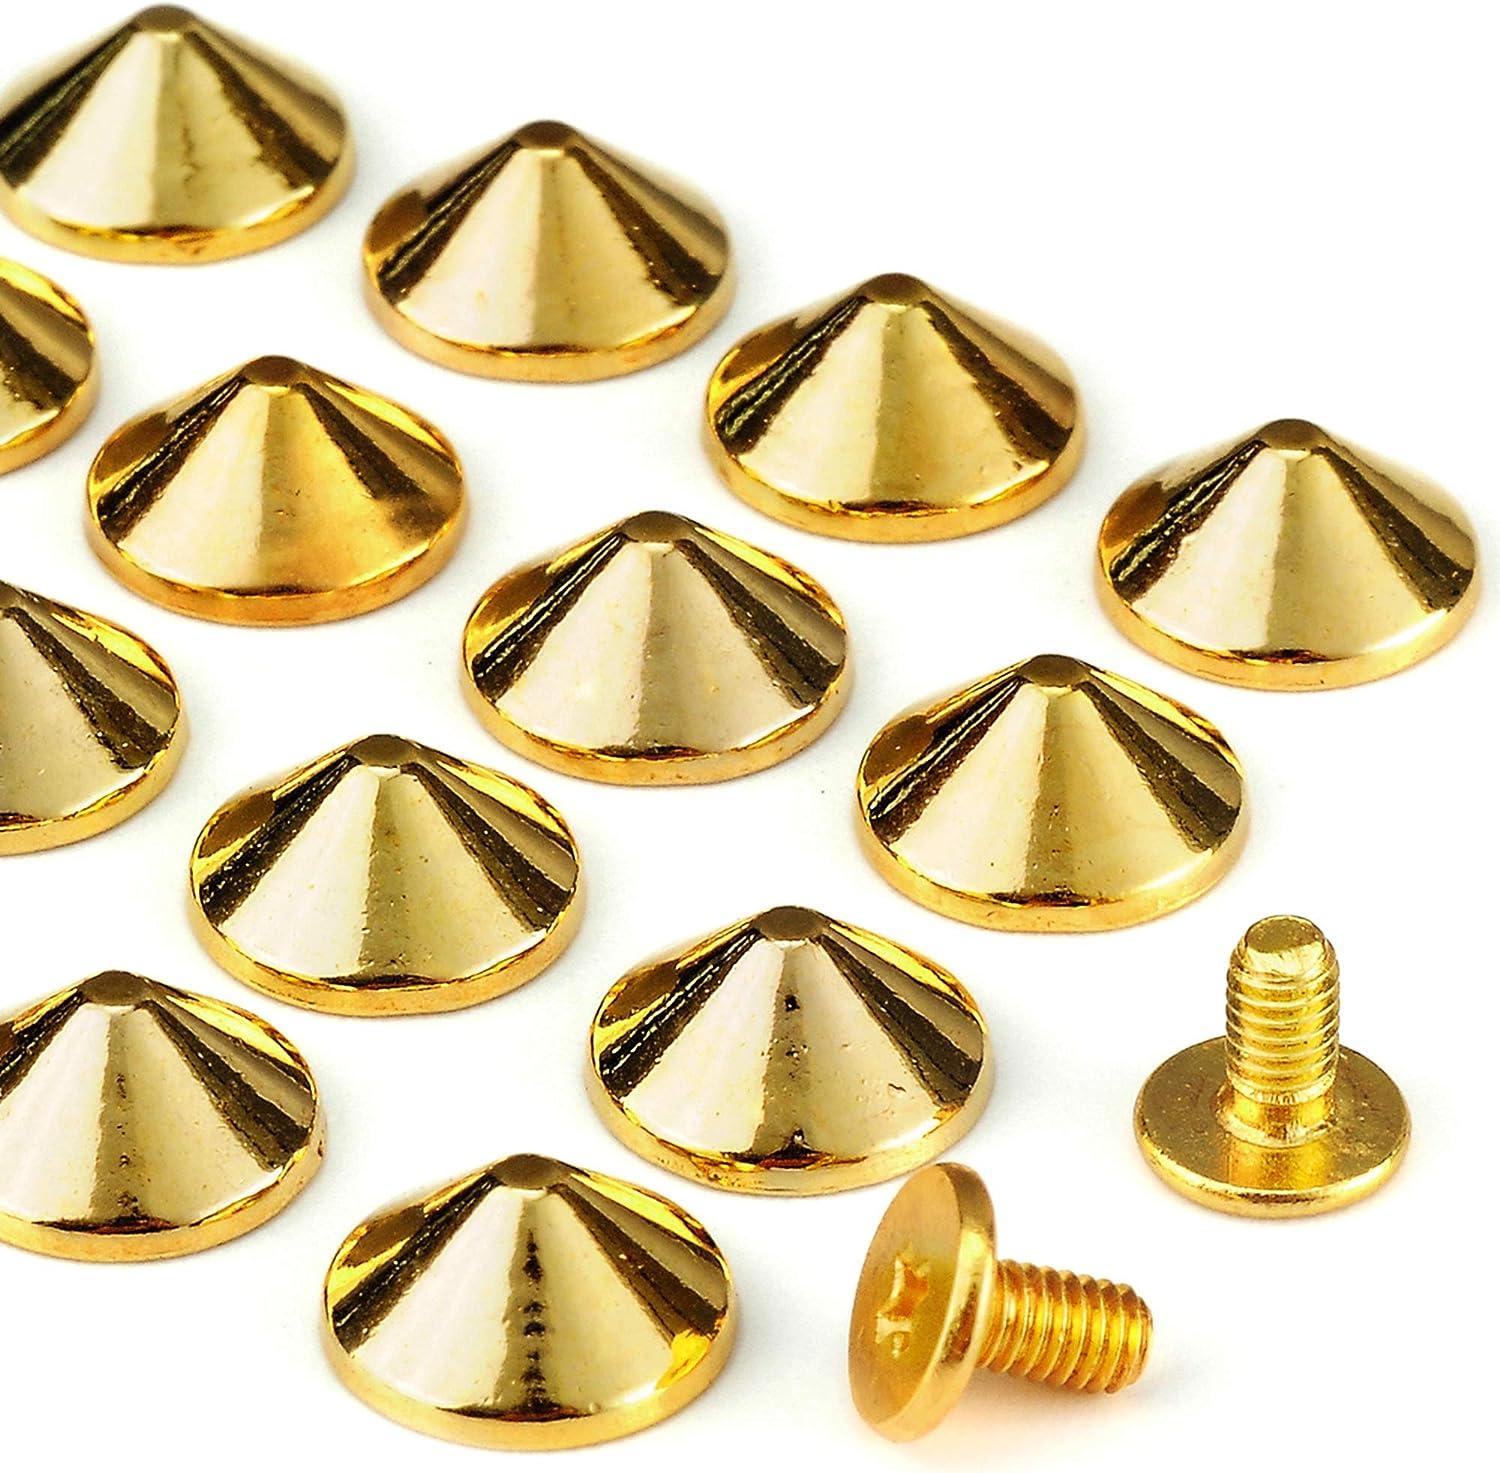 YORANYO 100 Sets Cone Spikes and Studs 4.7MM Height Gold Color 3/16 Bullet  Spikes Screw Back Punk Studs and Spikes for Clothing Shoes Leather Craft  Belts Bag Accessories with Installation Tools